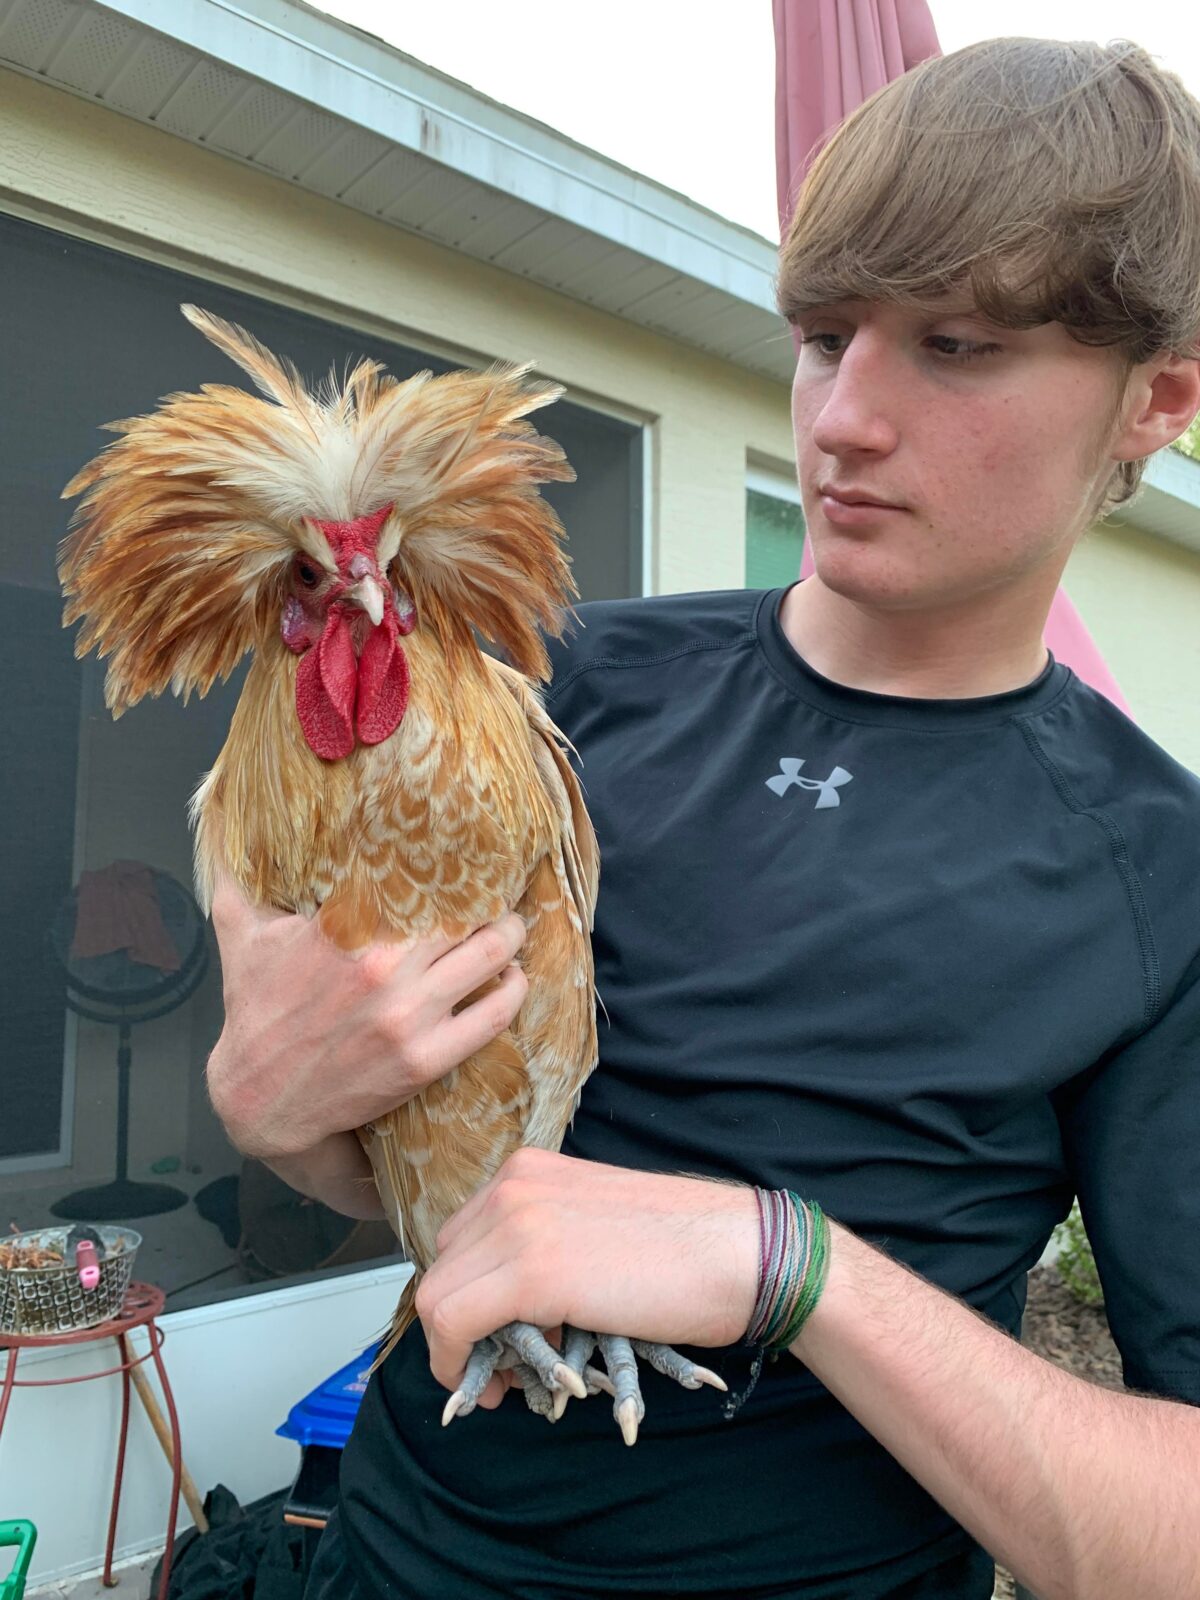 Kyle Maples, aged 17, holds a popular ornamental breed of chicken known as a Polish.